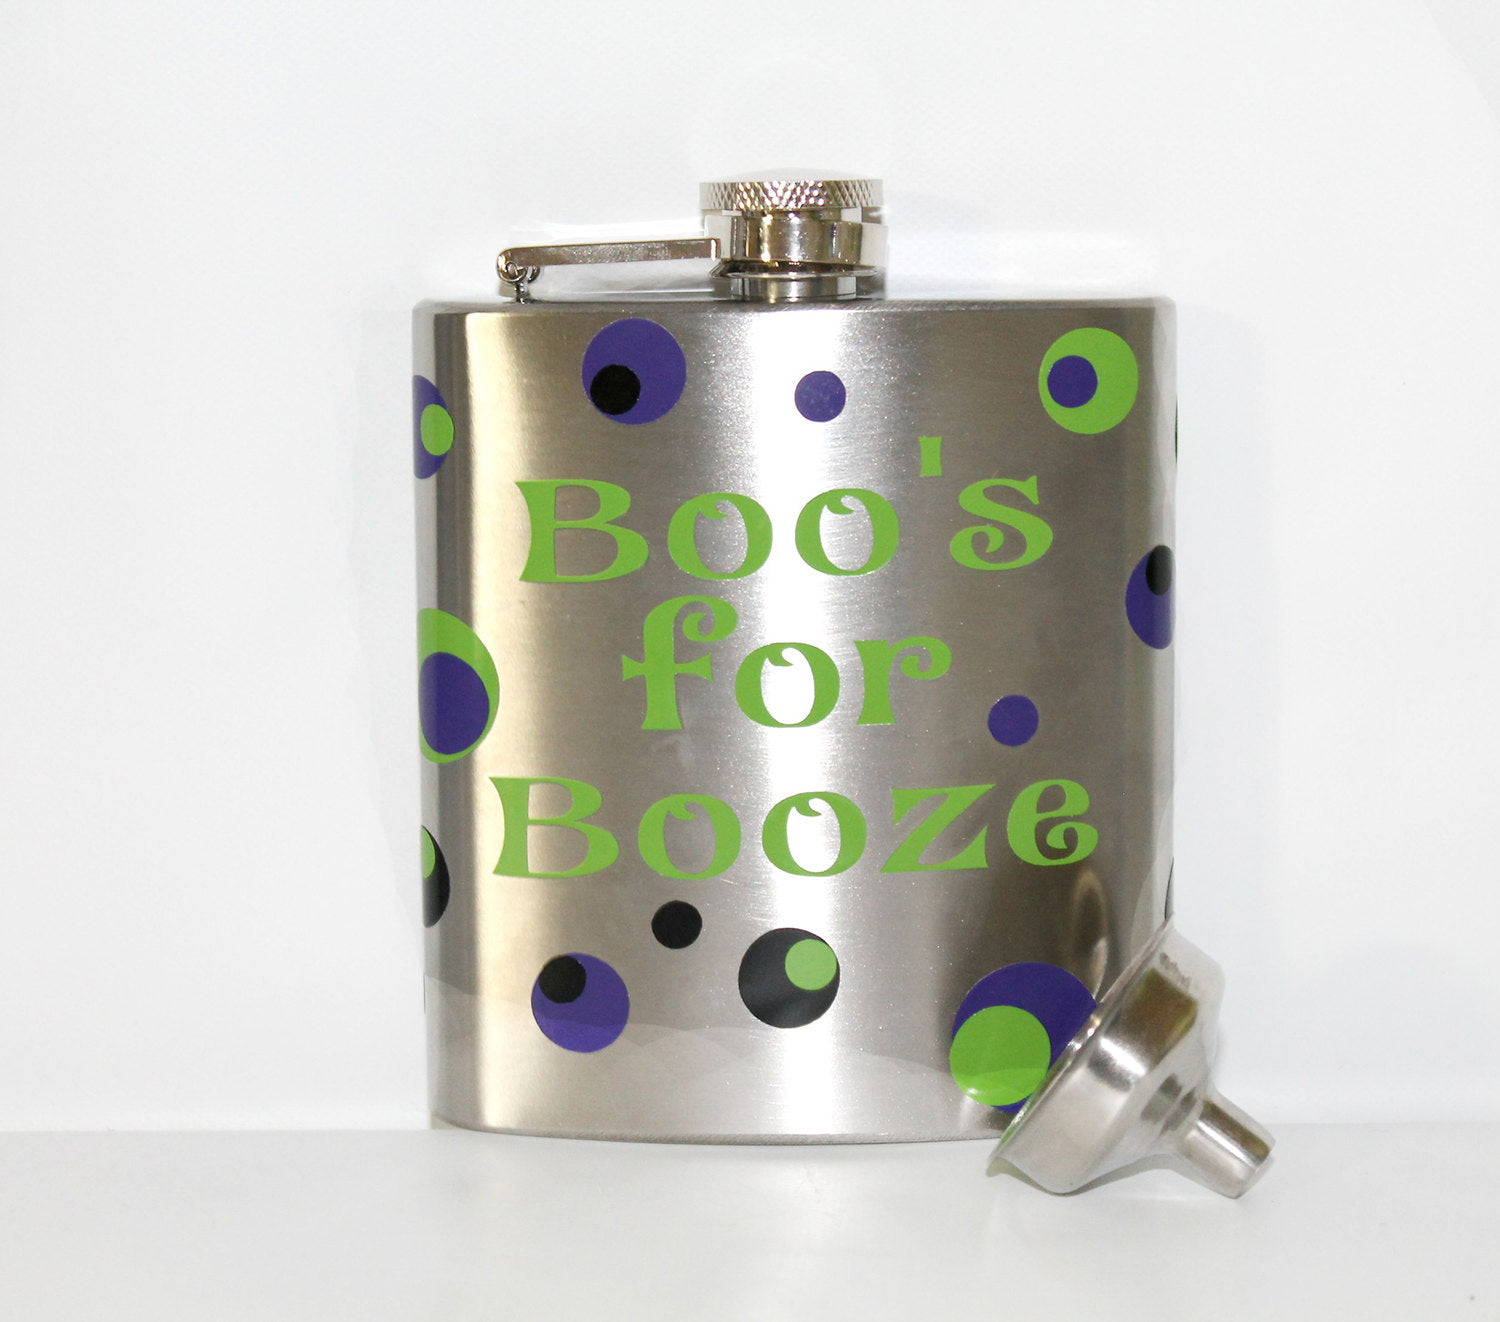 Boo's for Booze" Stainless Steel Flask with Funnel - Halloween - Birthday - Party - Celebration - Gift - Ghost - Themed - Men